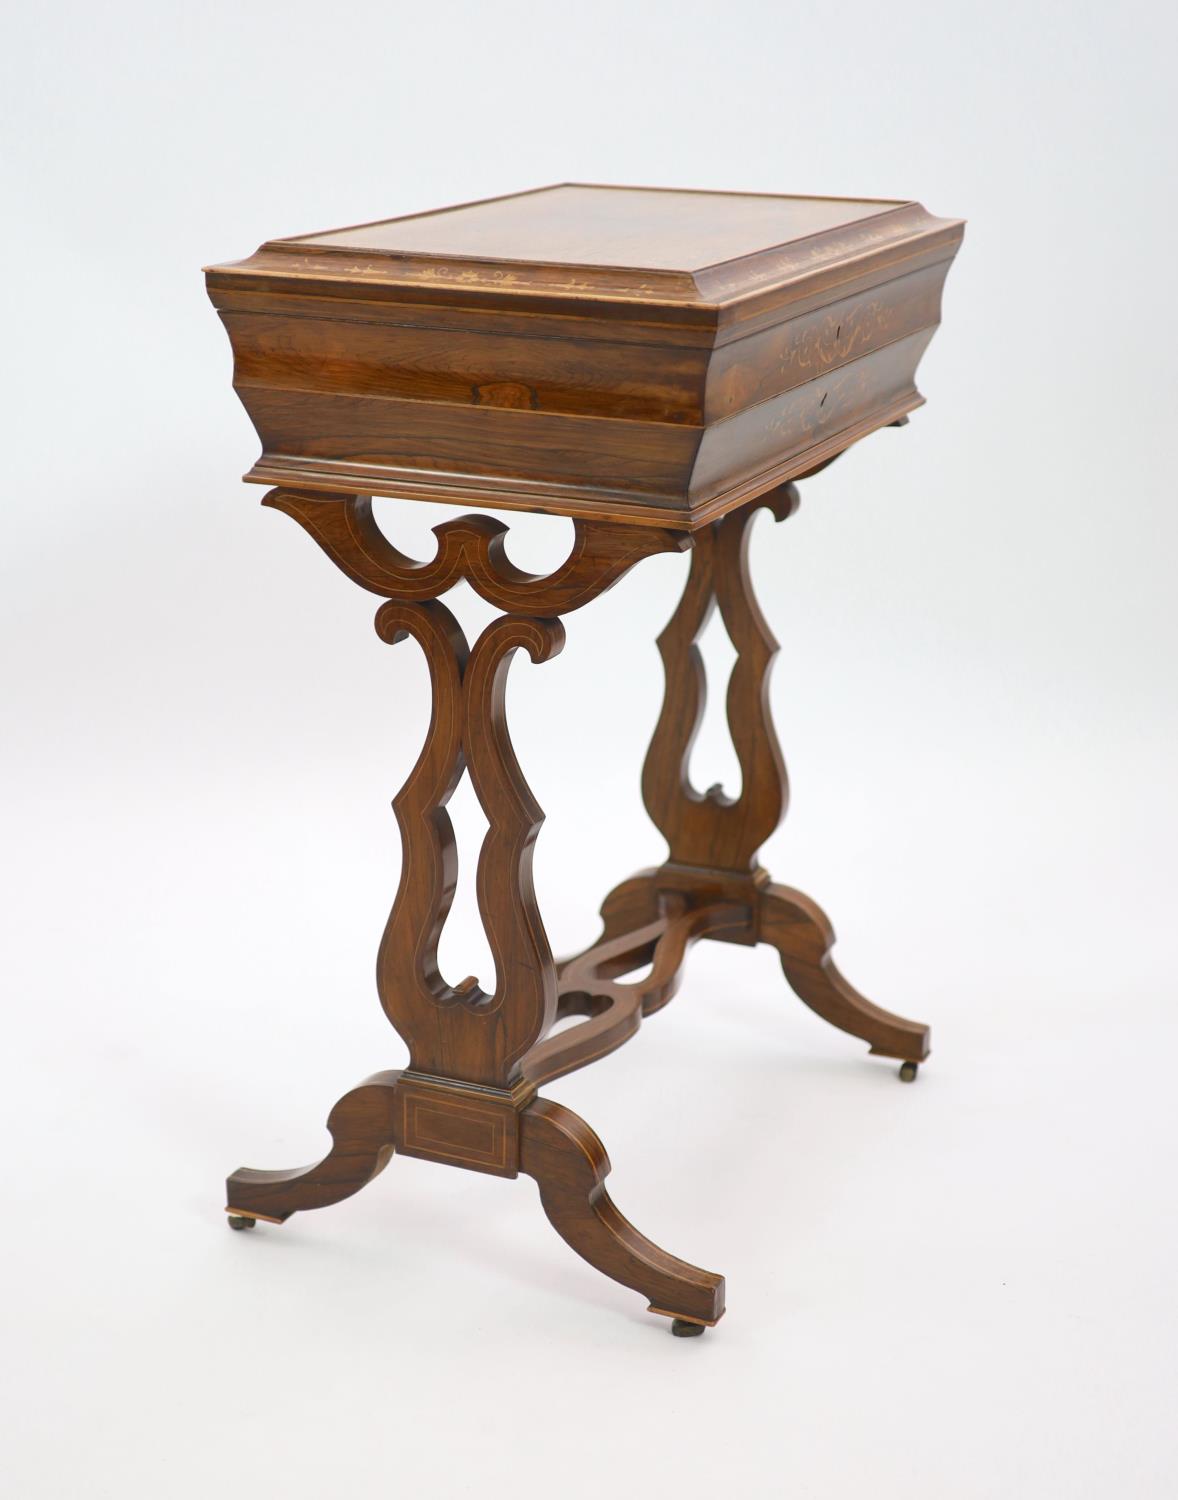 A 19th century French rosewood and sycamore lined lady's dressing table, c.1830, by Alphonse Giroux, - Image 5 of 6